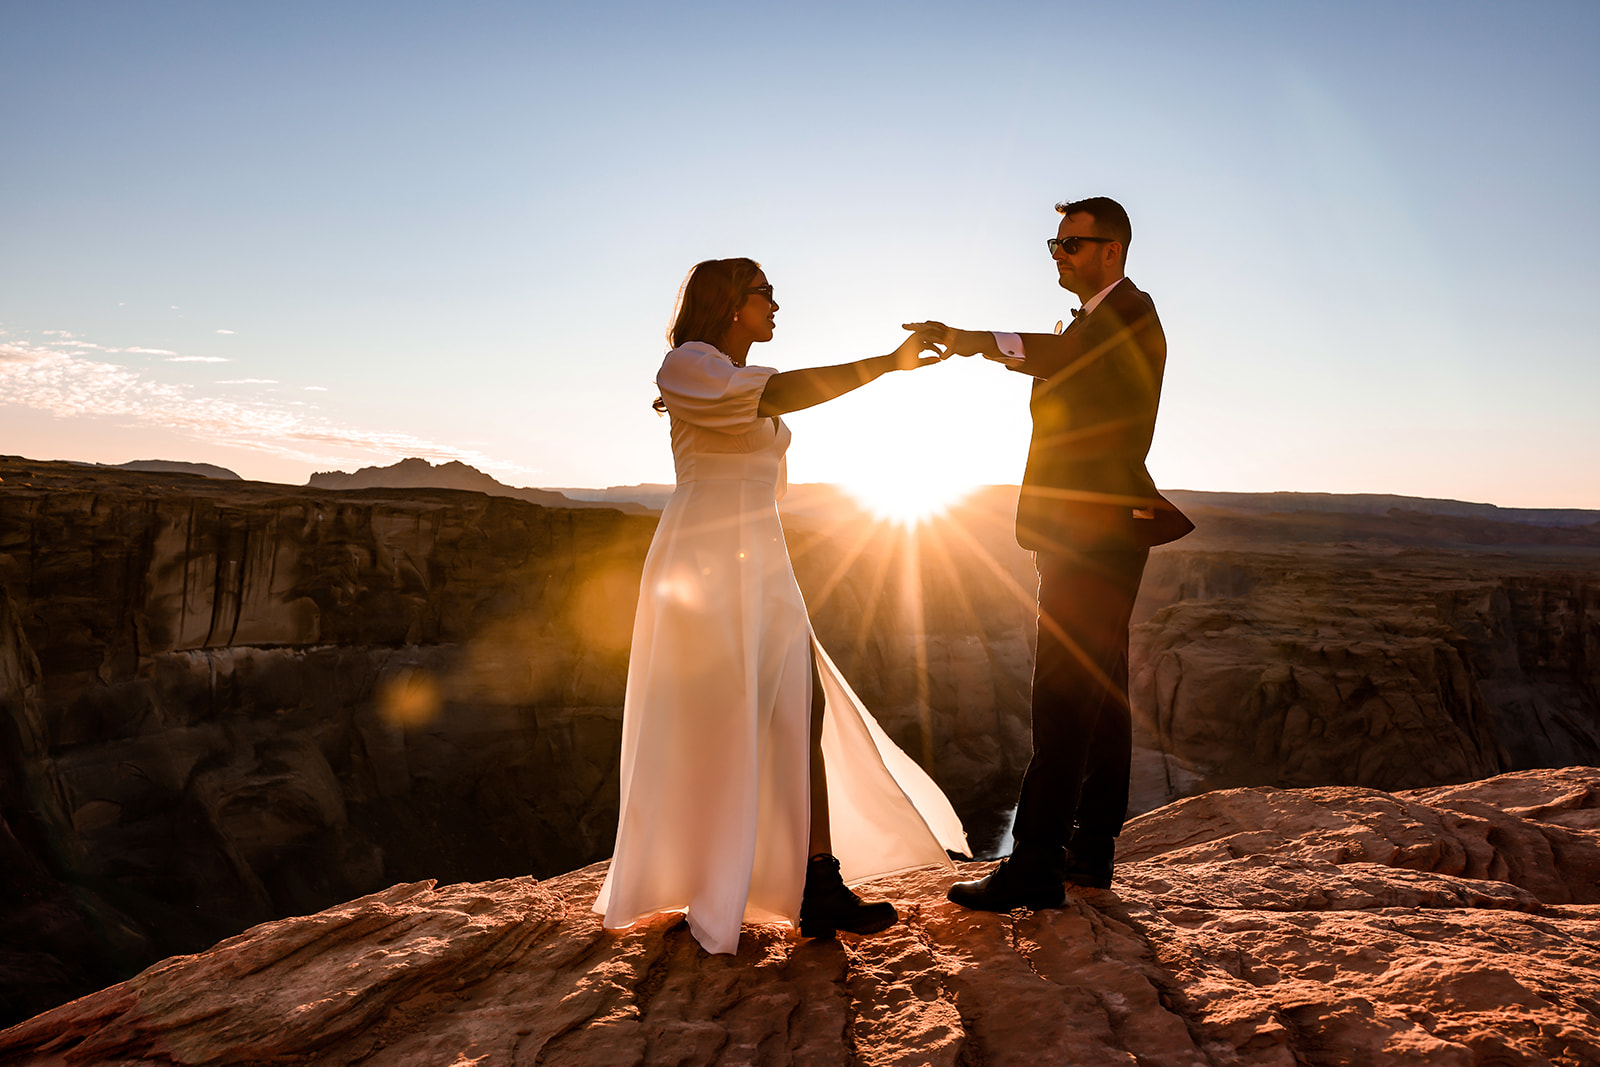 Dancing in the wind at sunset, Horseshoe Bend elopement wedding